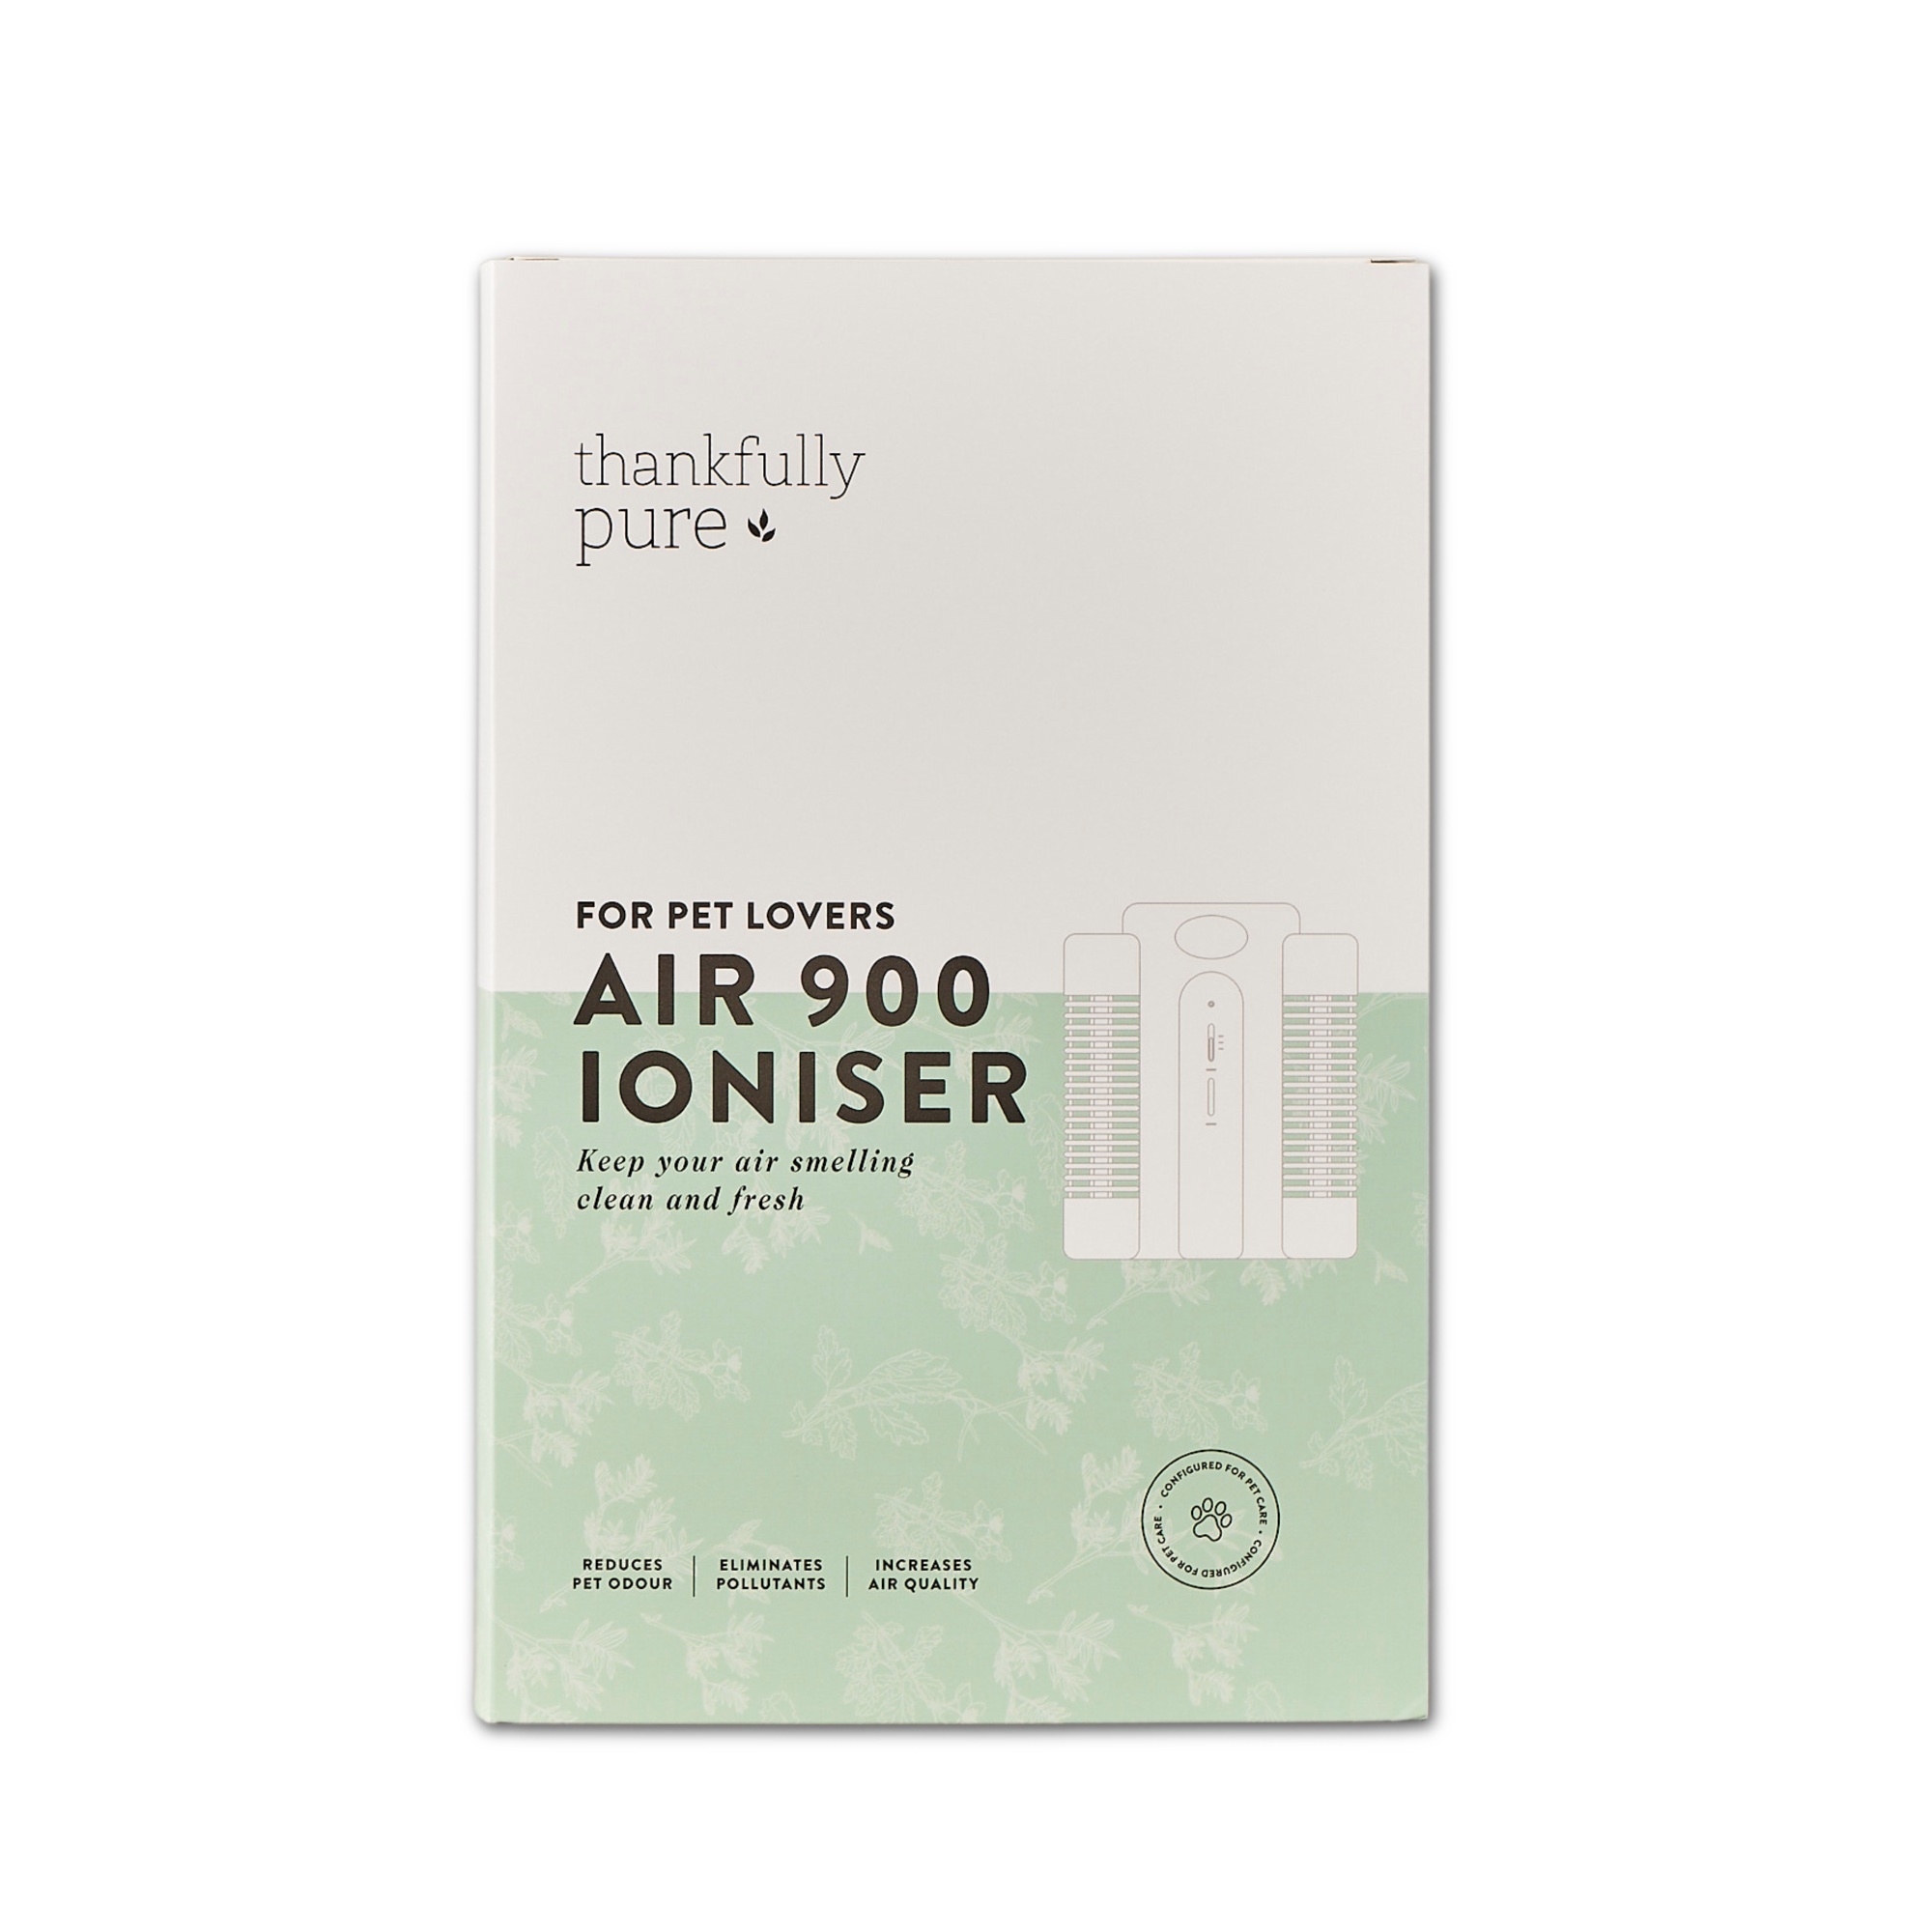 Thankfully Pure Air 900 - Ioniser for Pet Lovers